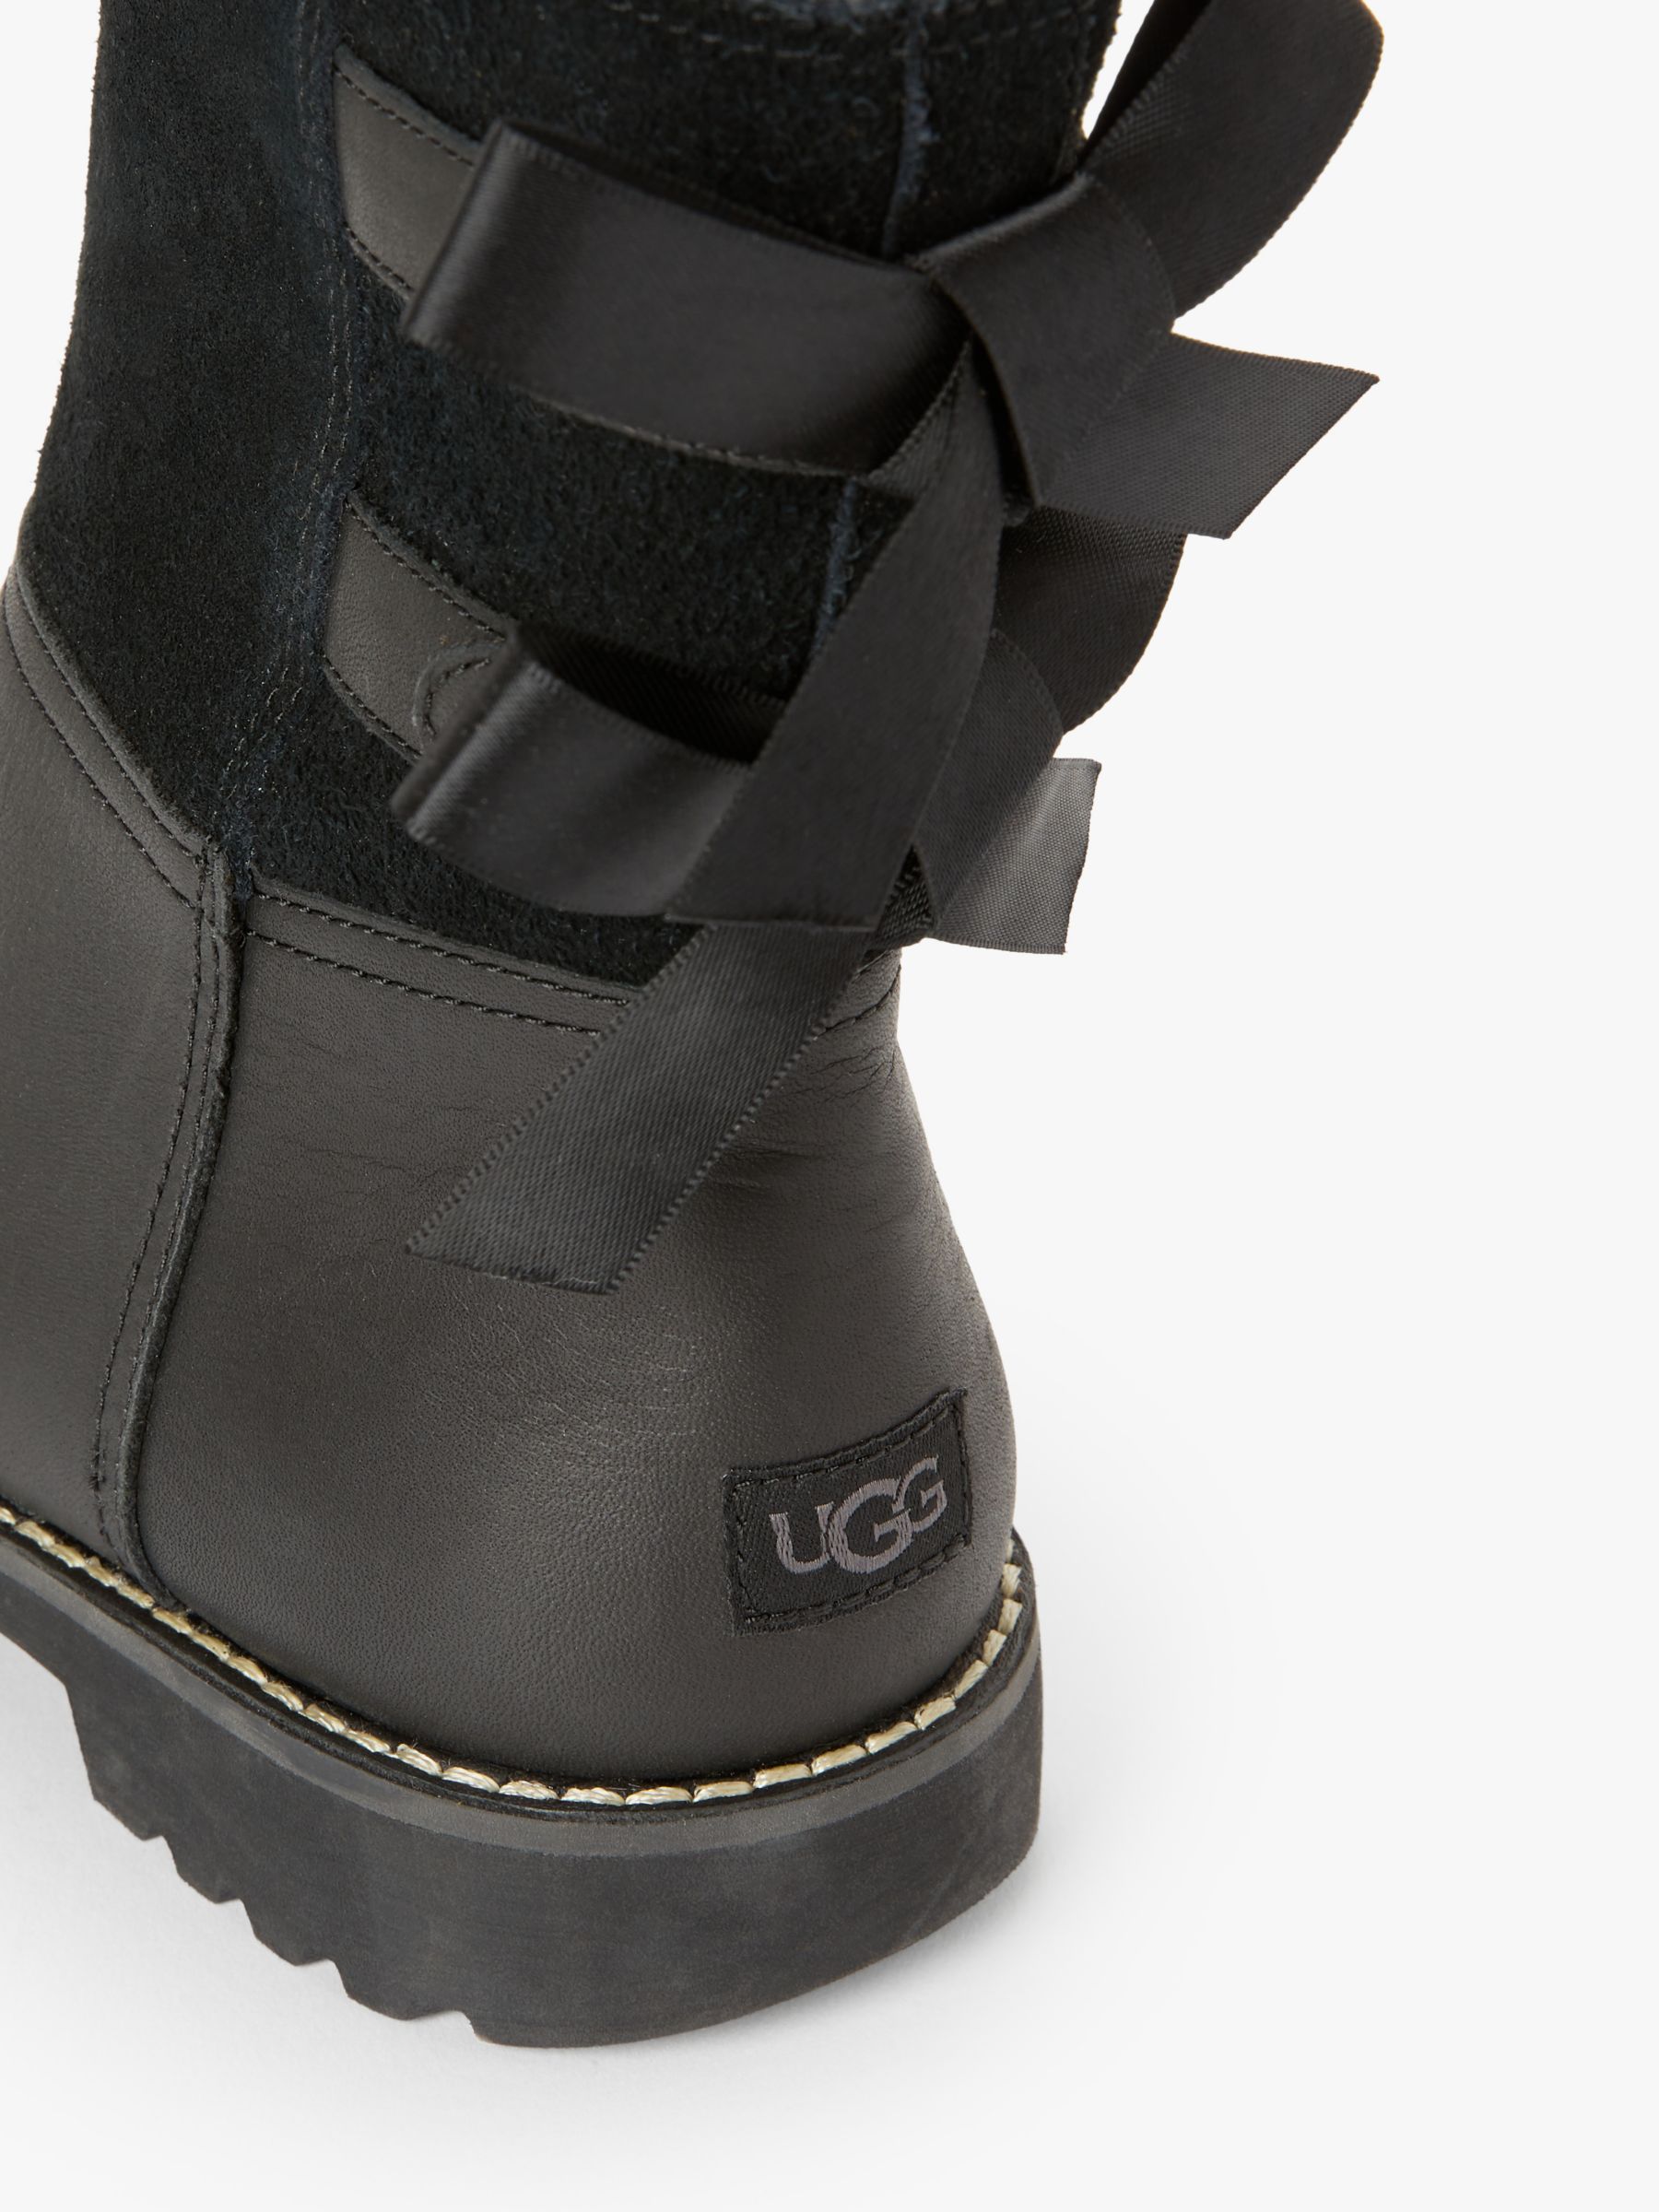 ugg black leather boots